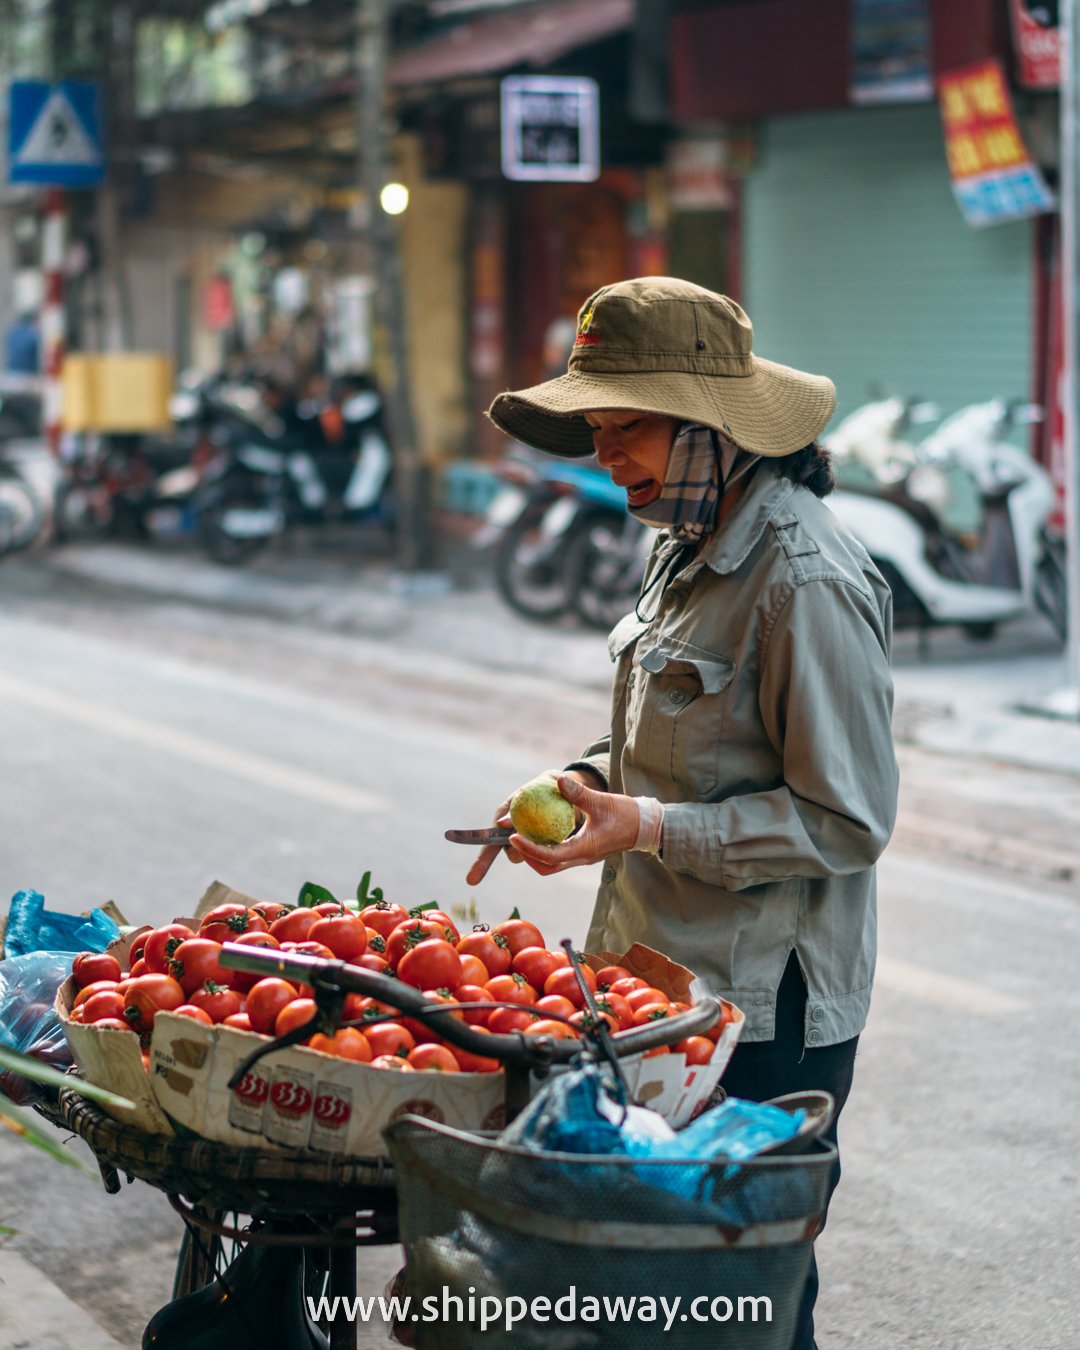 Lady cutting fruit for selling off of a bicycle in Hanoi's Old Quarter, Vietnam